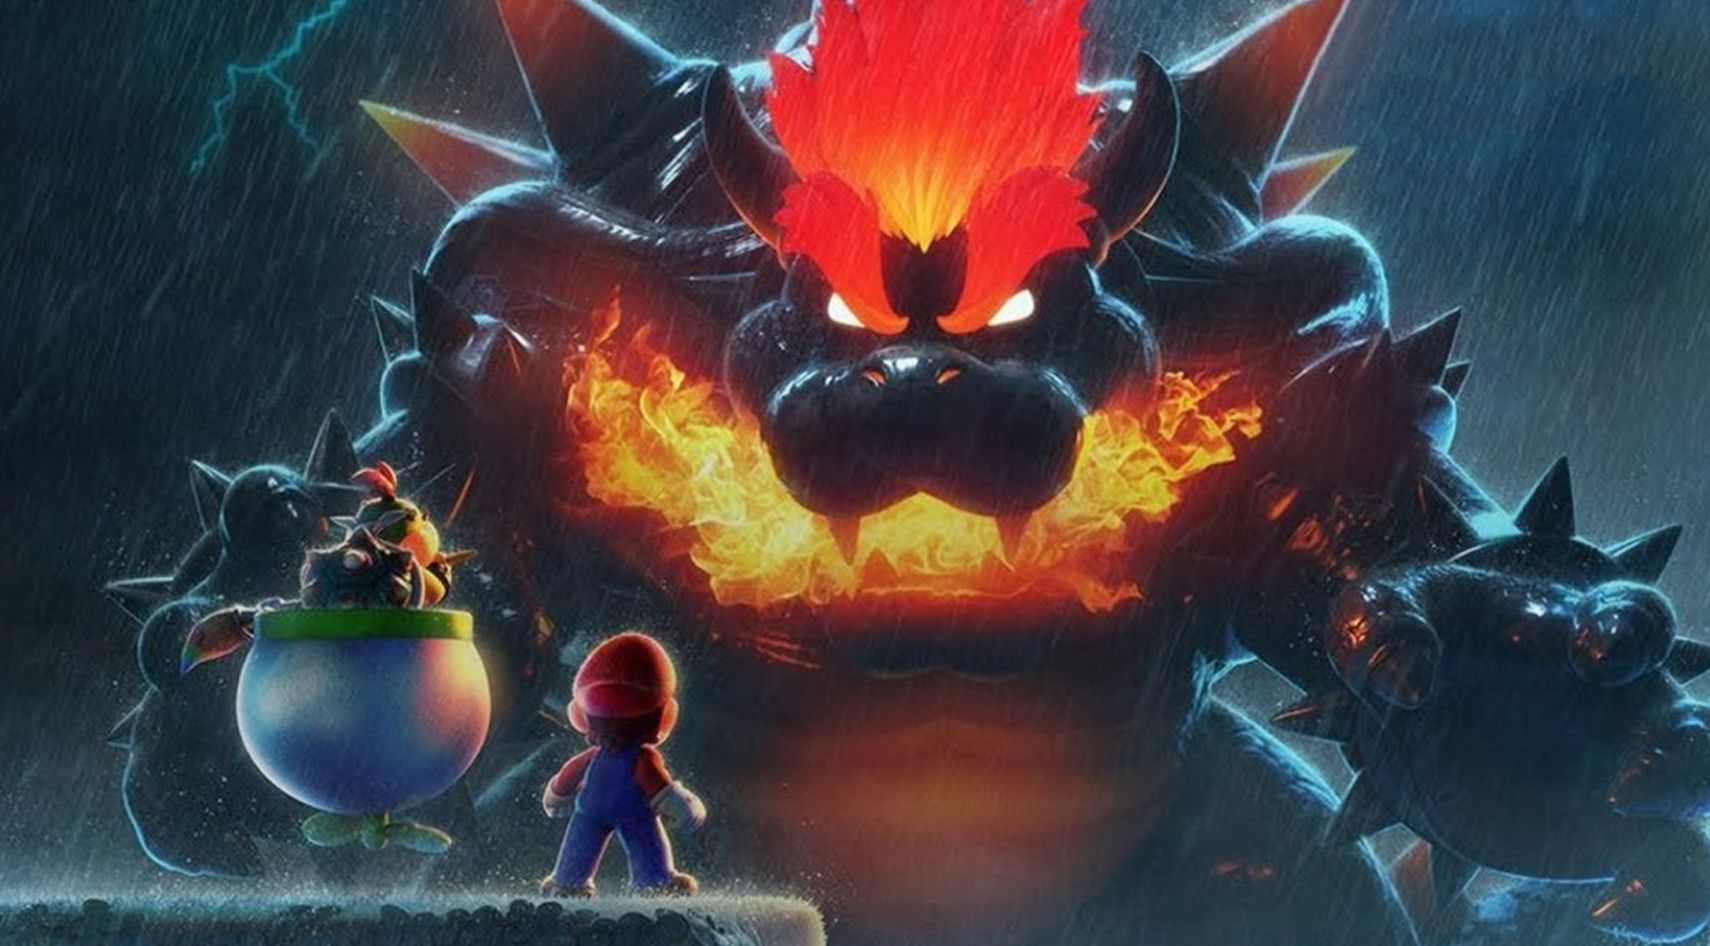 Super Mario 3d World Bowser S Fury Review Wii U Redemption ~ Philippines New Hope